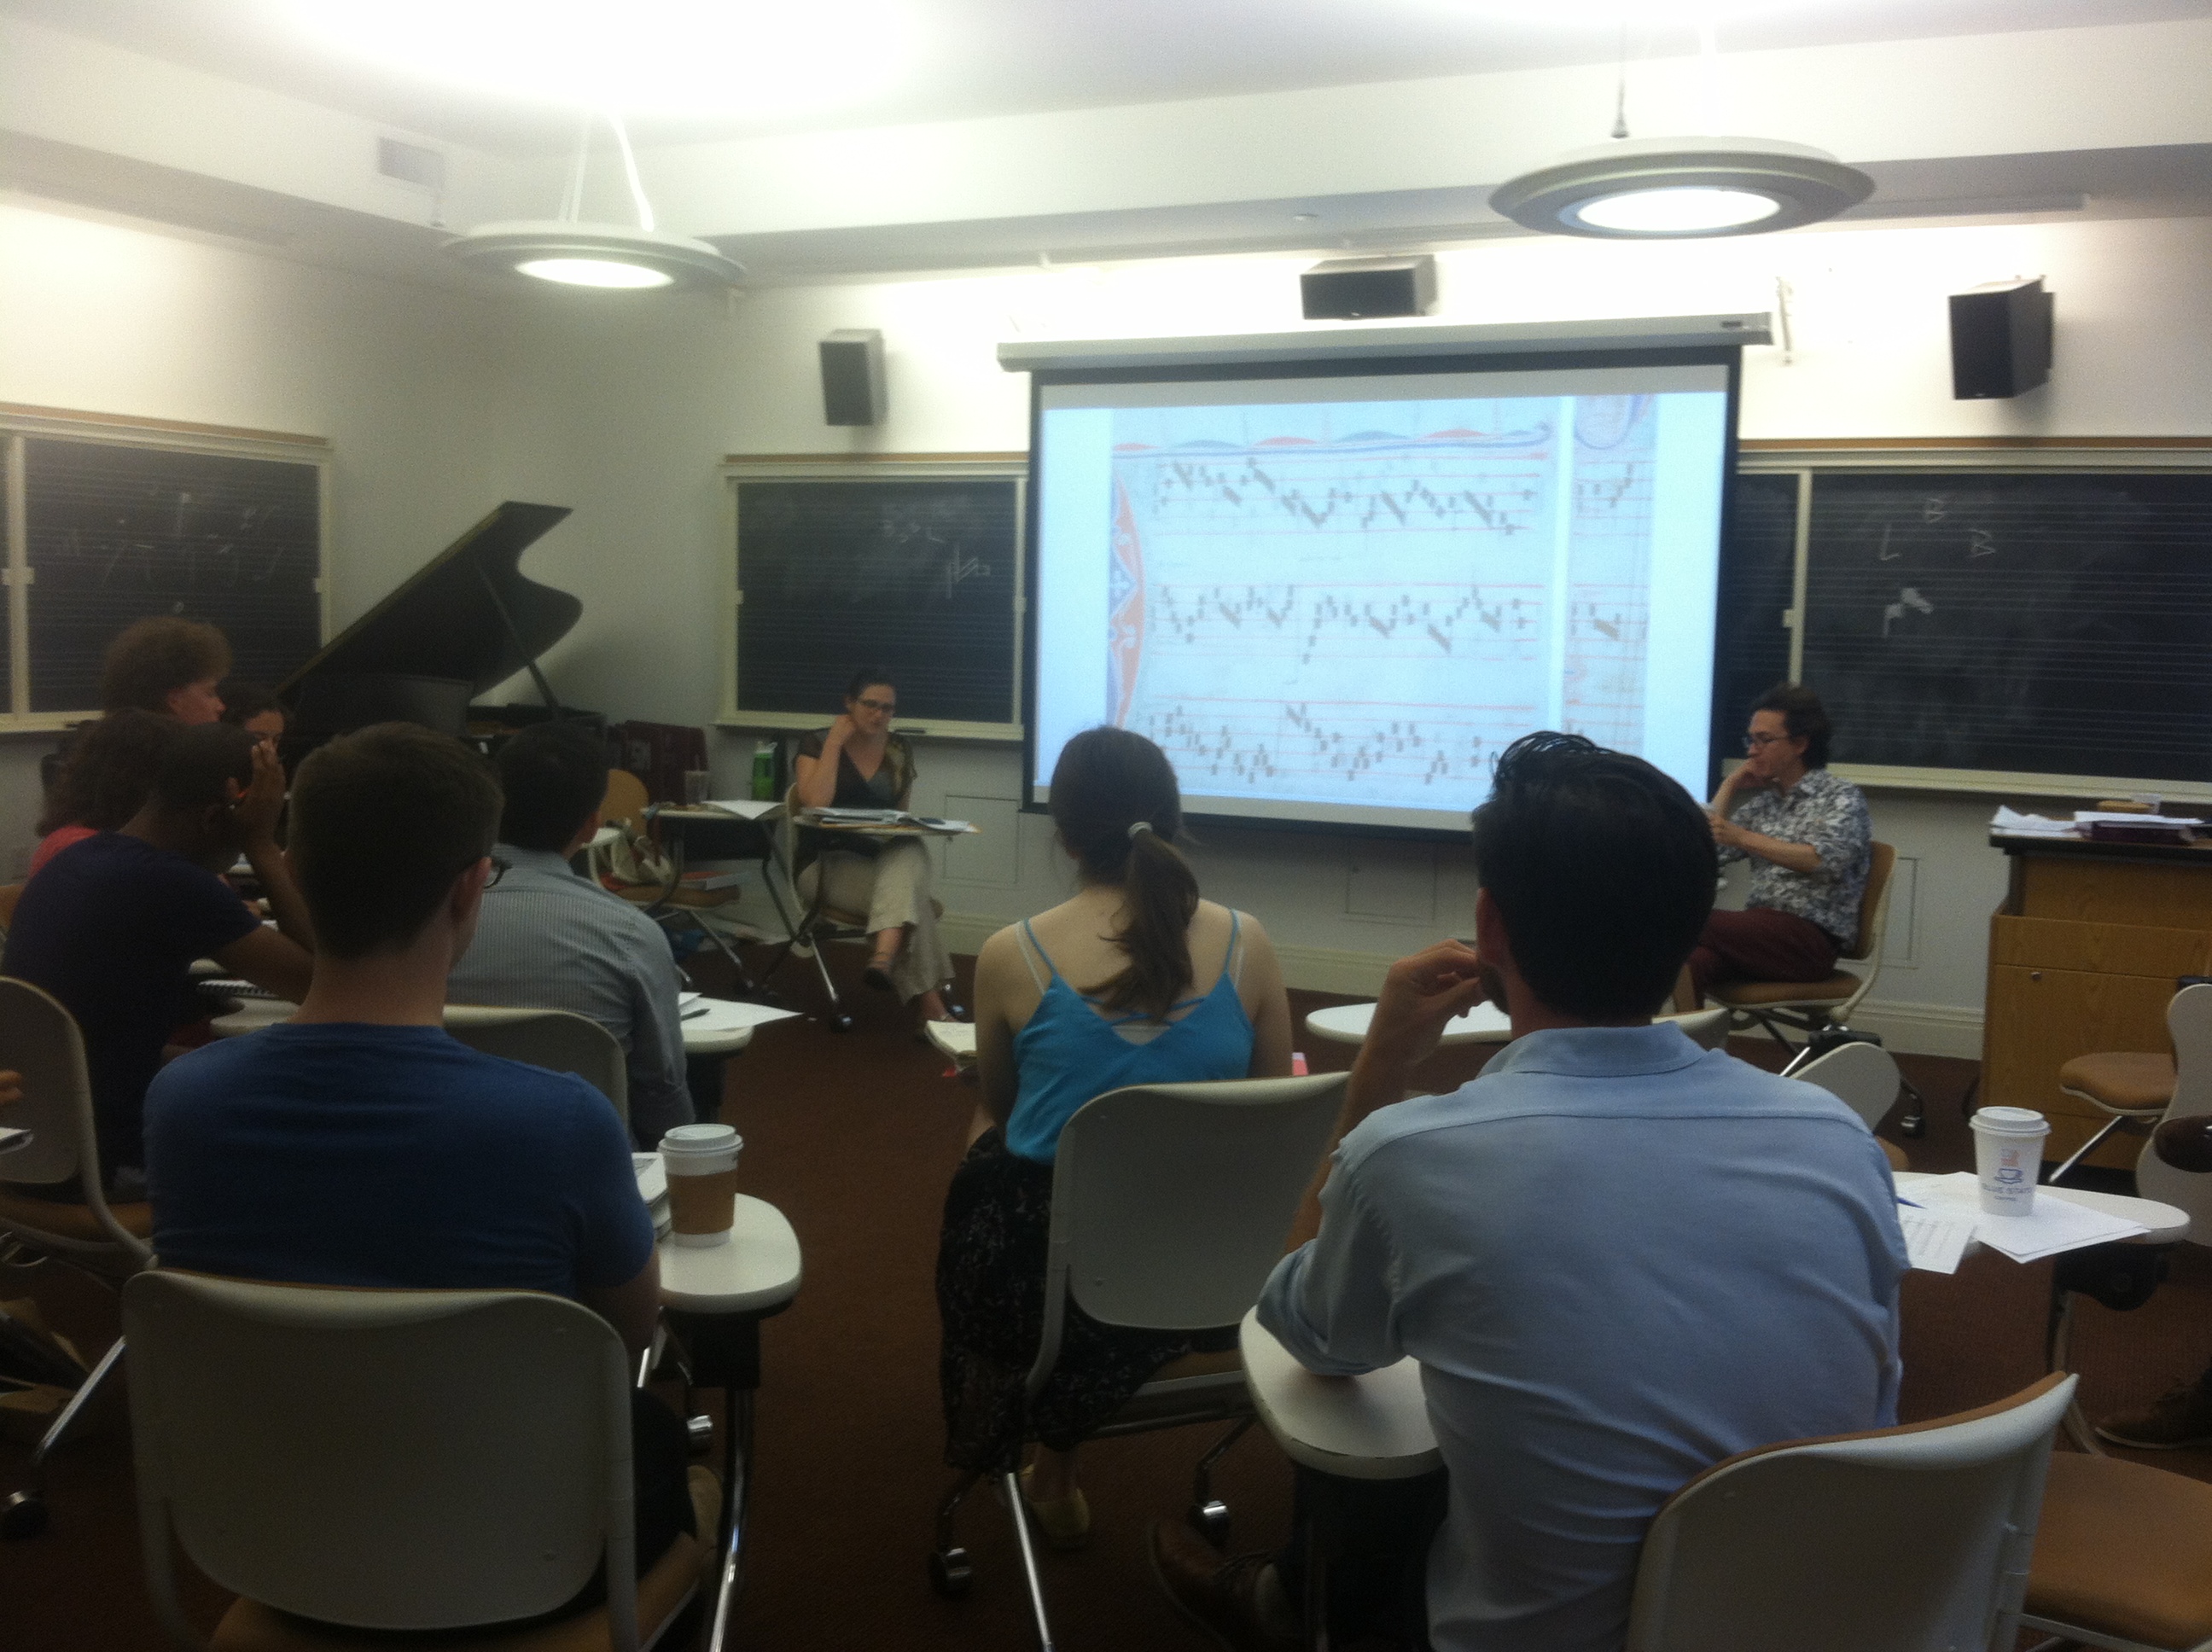 Summer Latin in Toronto and Historical Notations at Yale